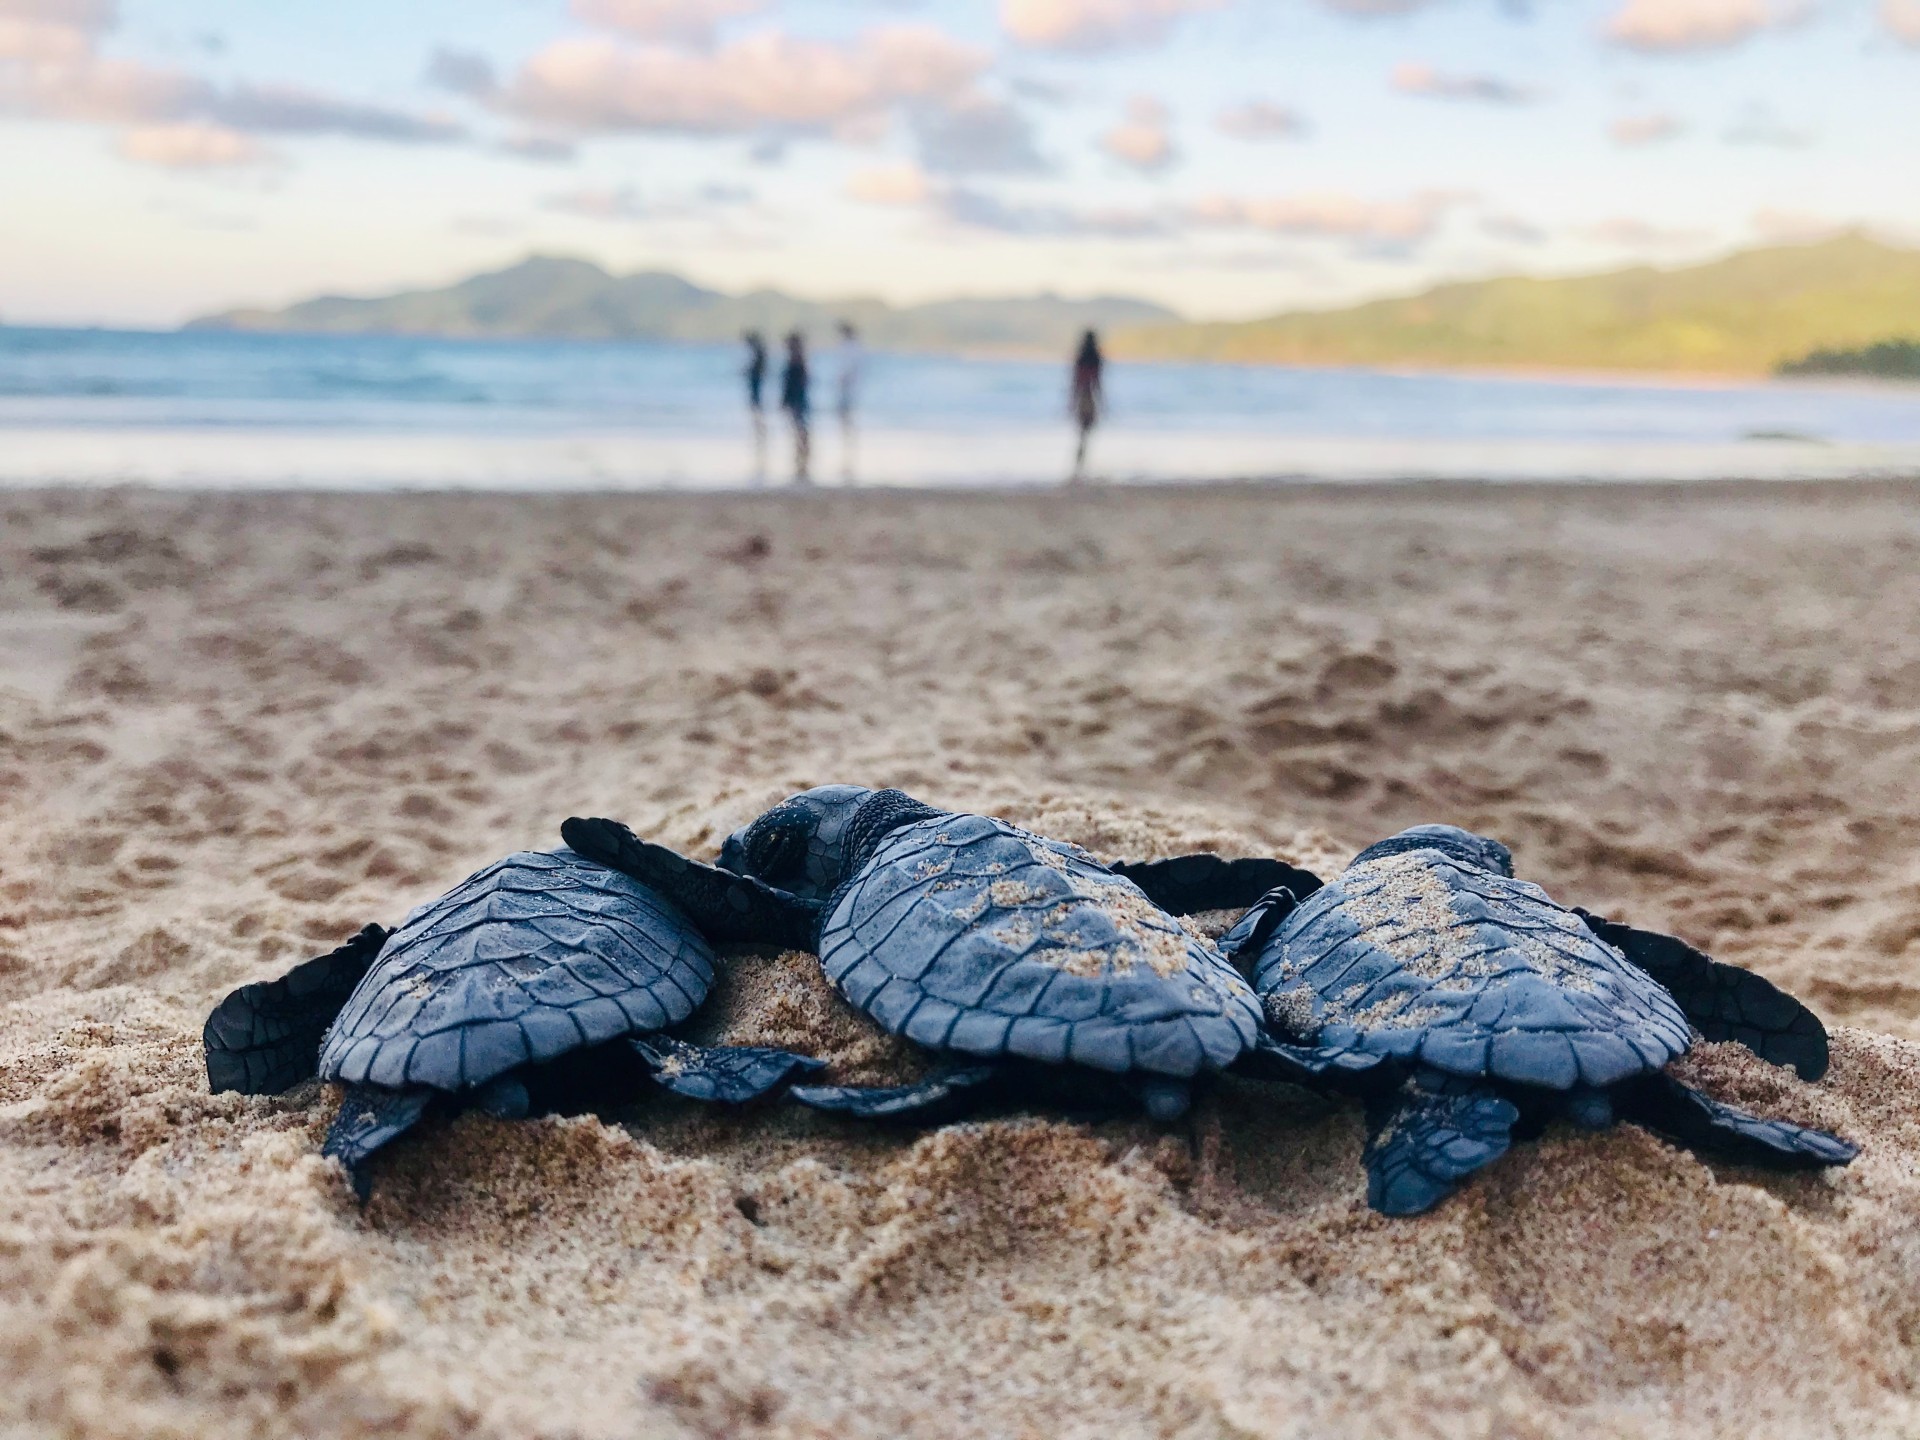 Baby turtles on a beach